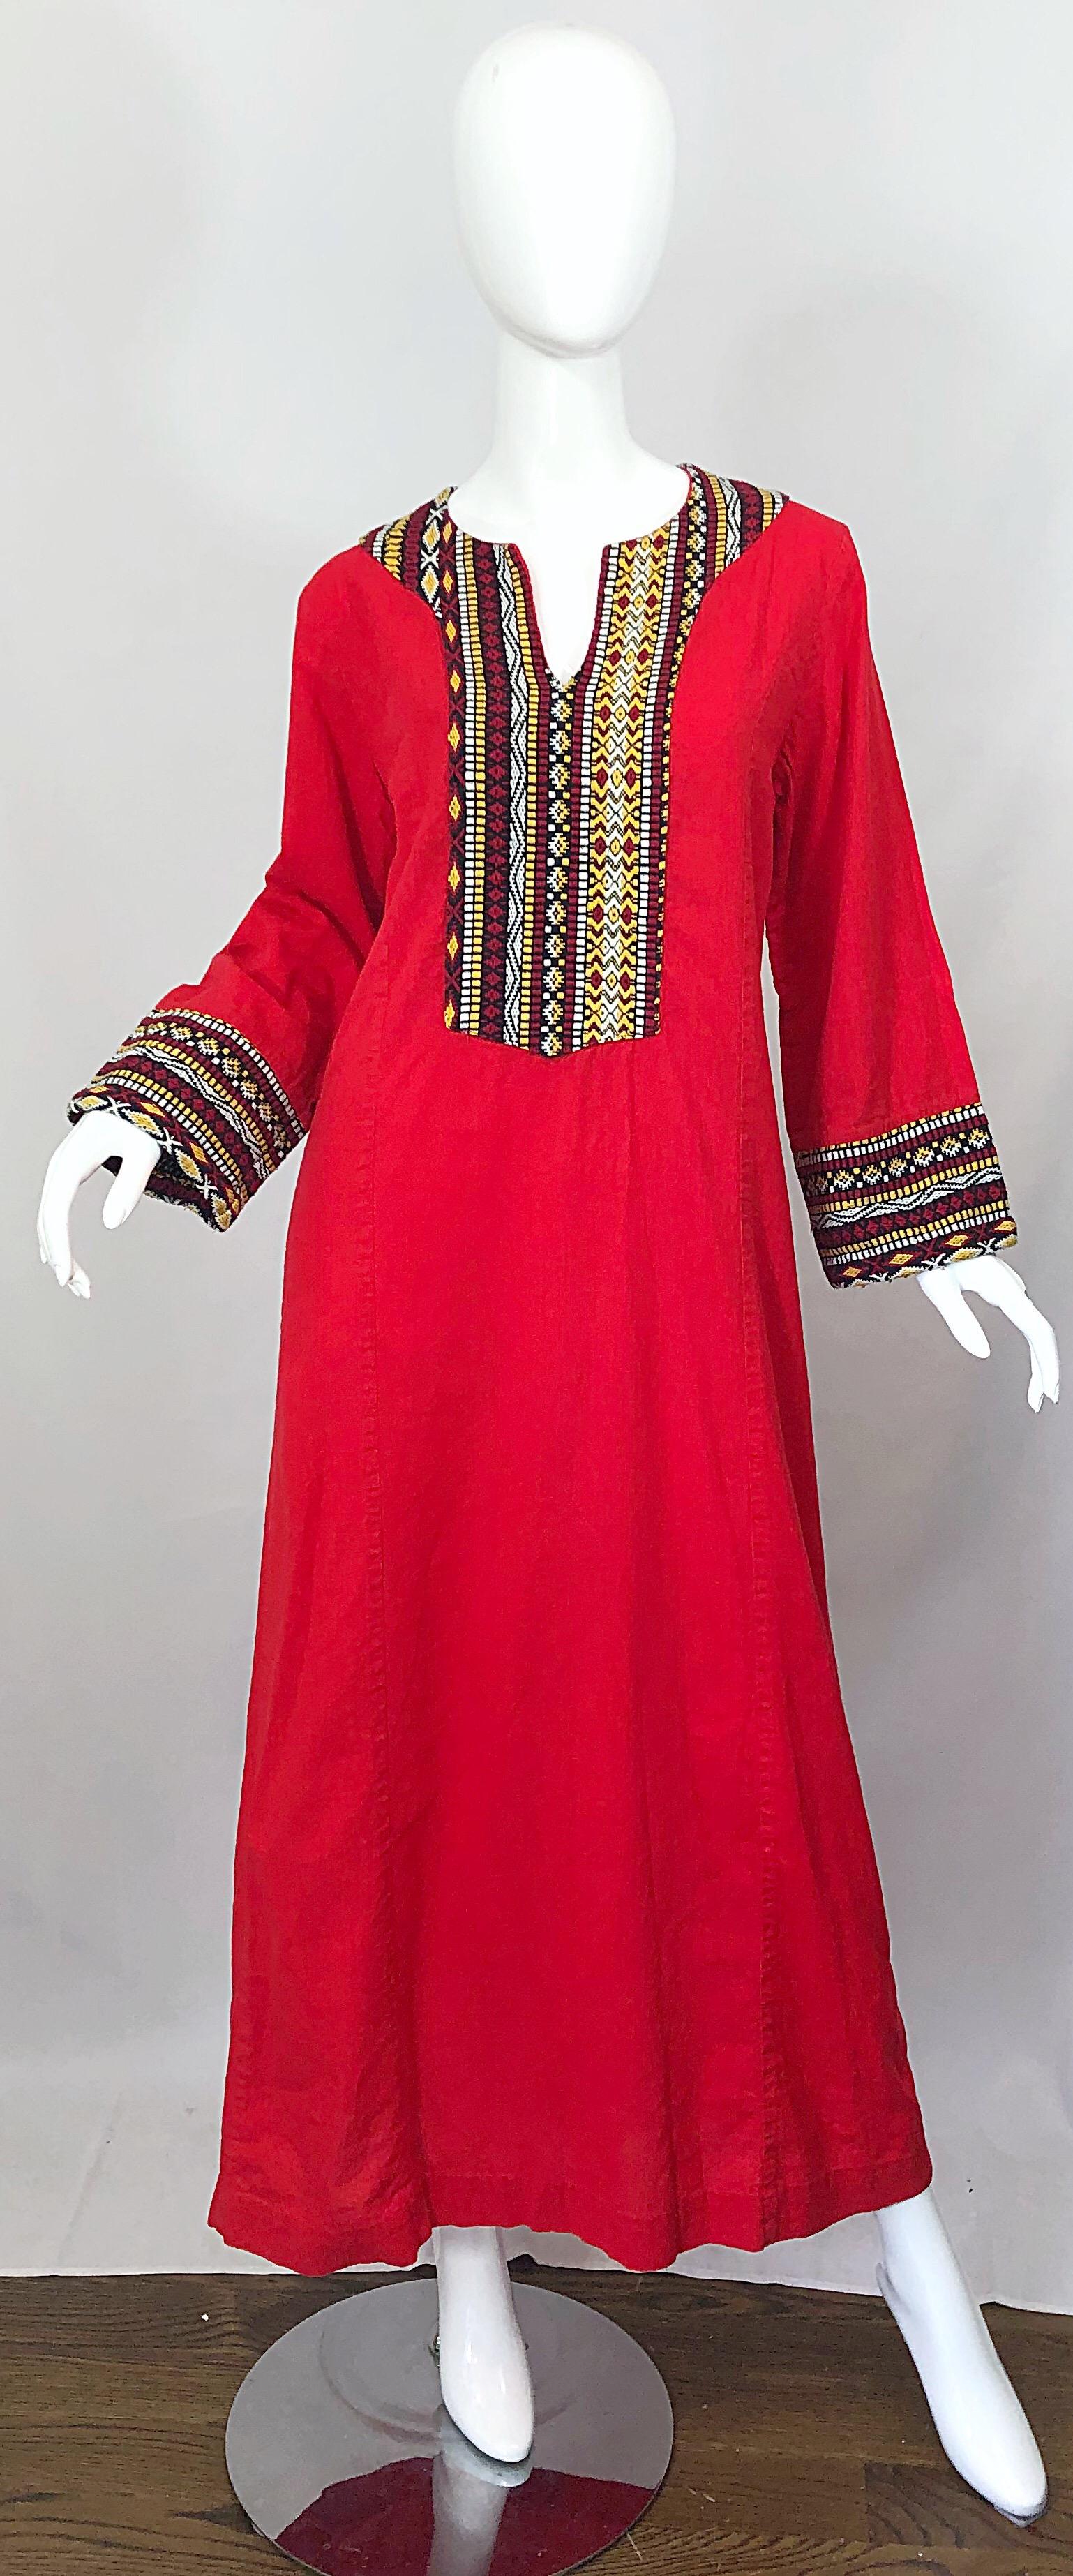 1970s lipstick red linen and cotton blend long bell sleeve caftan maxi dress! Features embroidery in red, yellow, black and white around the neck and sleeves. Simply slips over the head. Great for so many occasions. A very easy versatile piece to